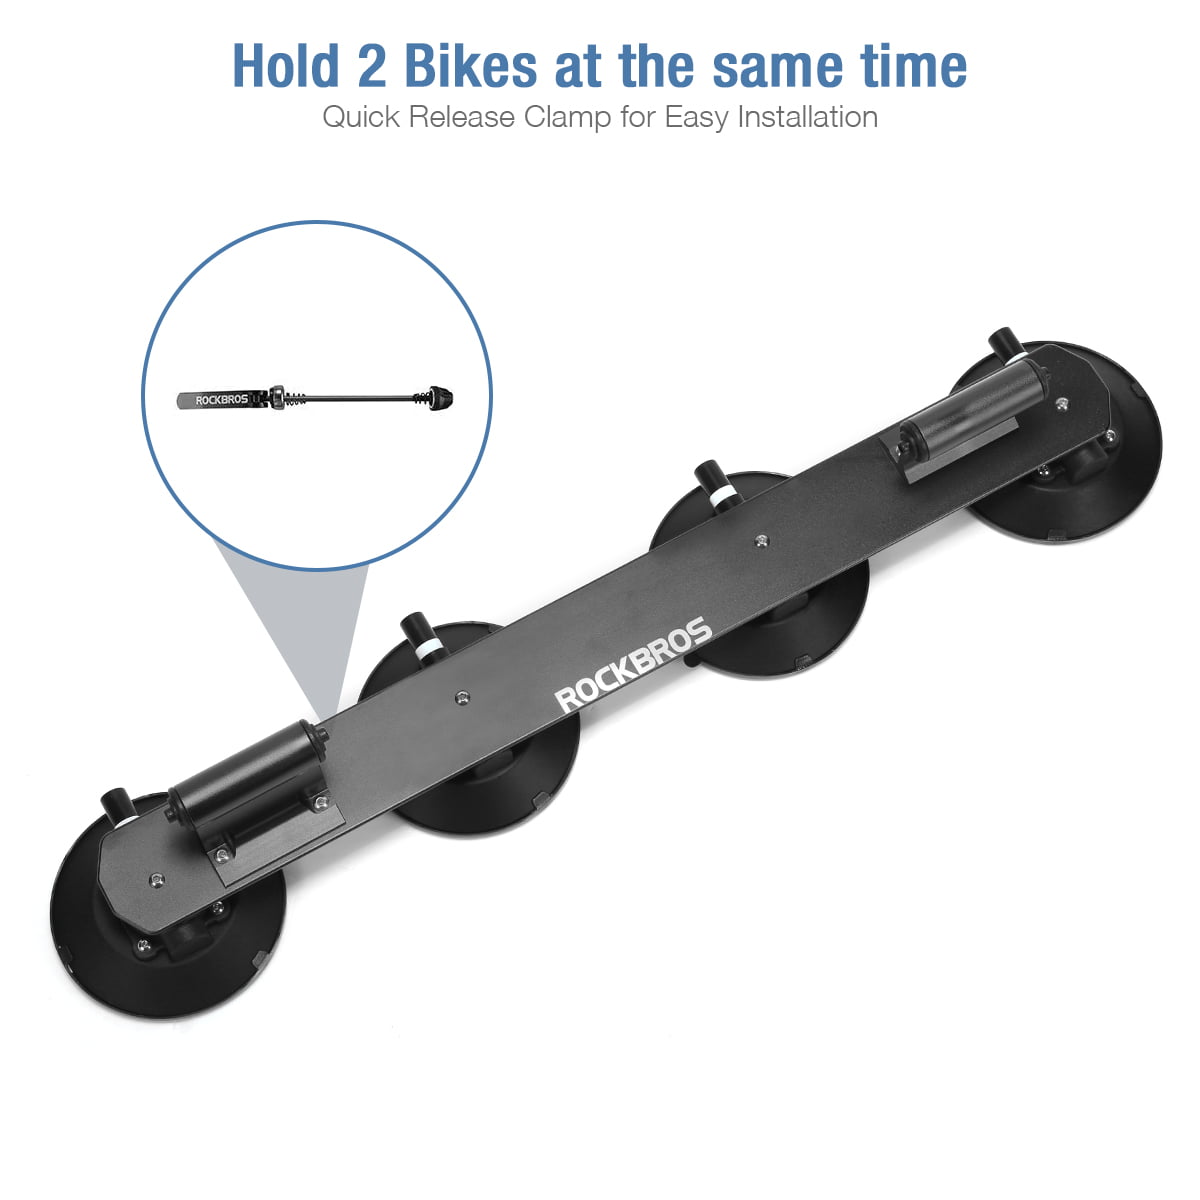 ROCK BROS Suction Cup Bike Rack for Car Roof Top Sucker Bike Rack Quick Release Aluminium Alloy Bike Carrier with Sucker for Car 